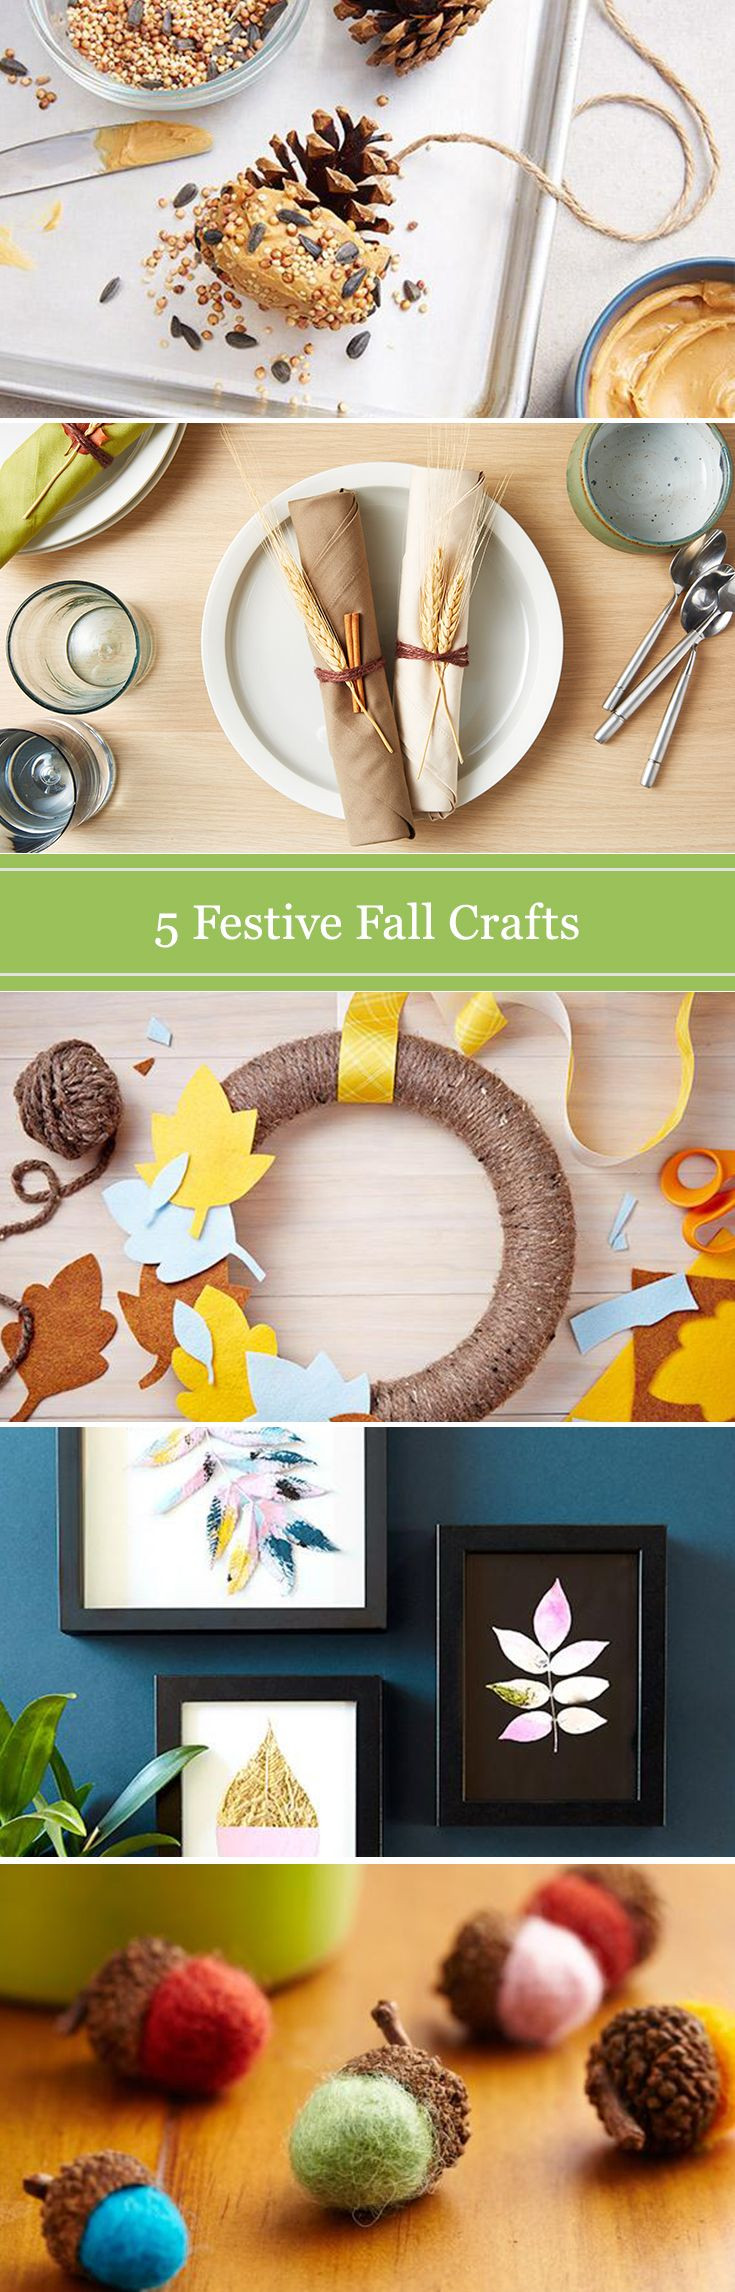 Adult Craft Projects
 51 best Craft Ideas for Adults images on Pinterest